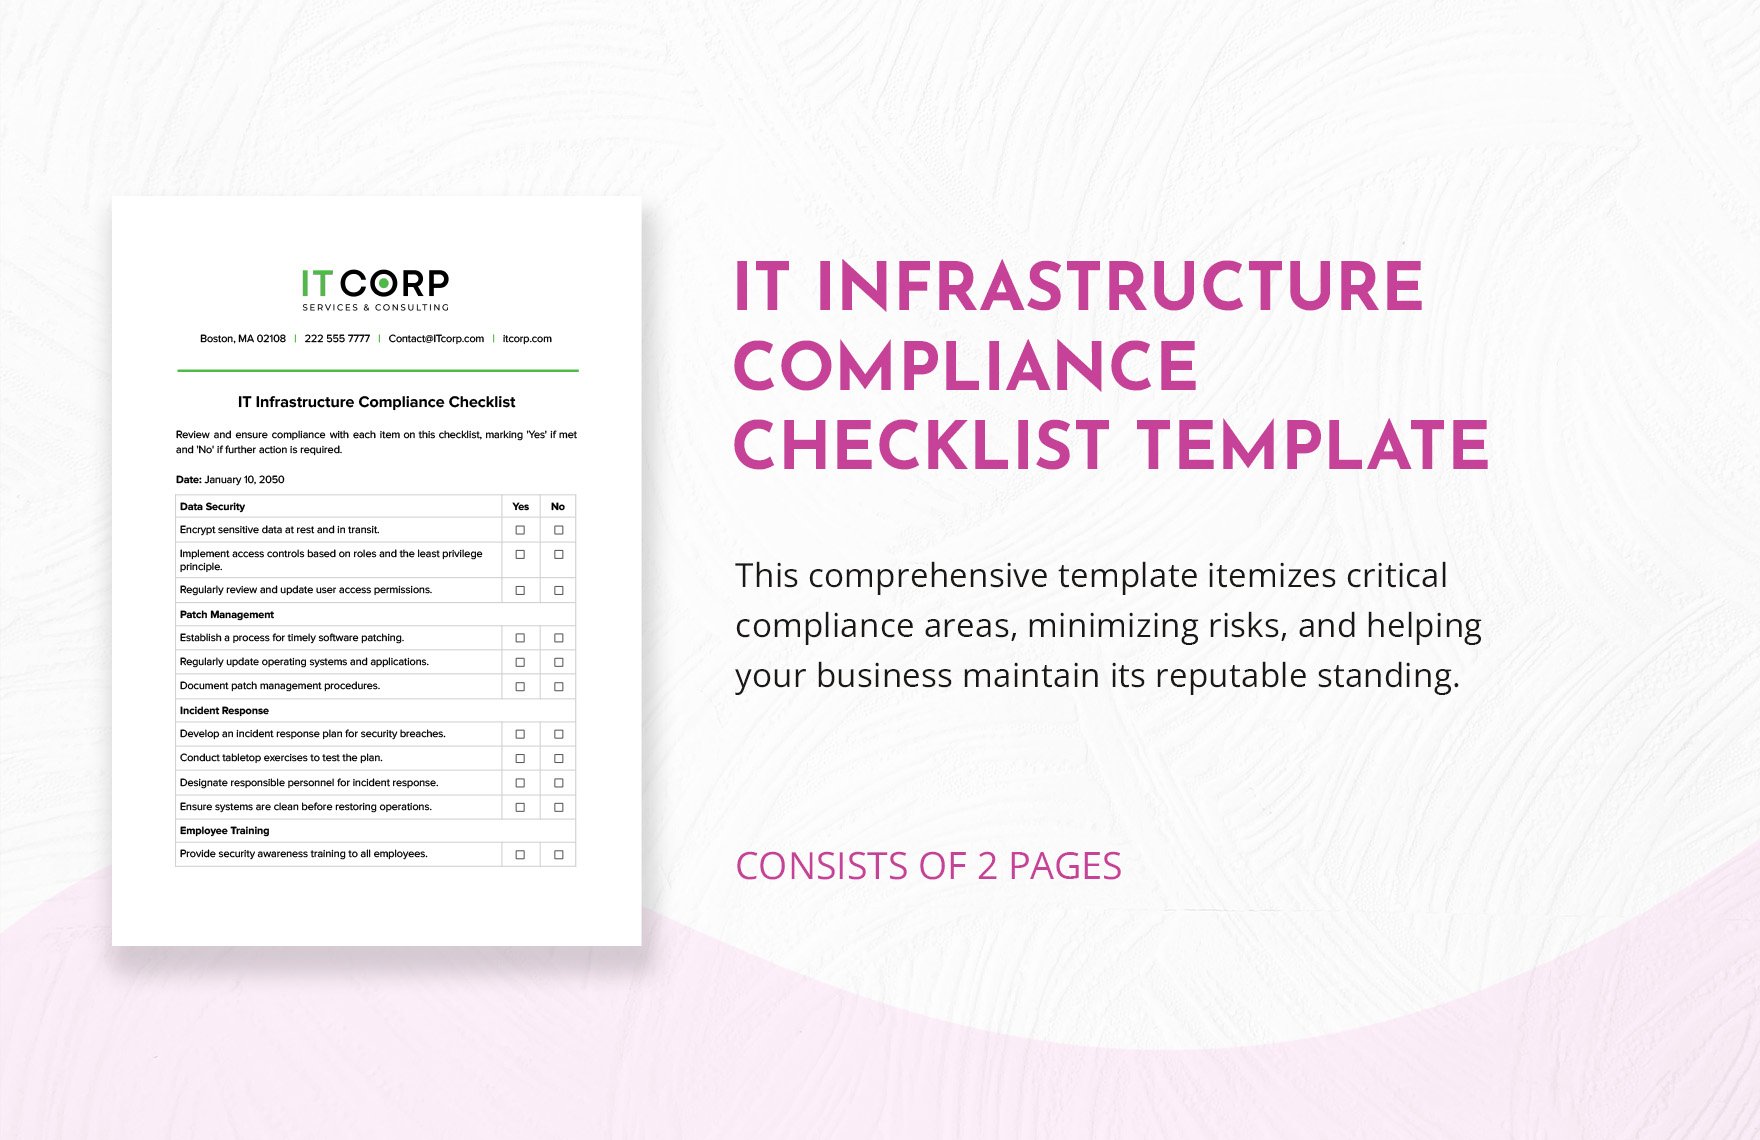 IT Infrastructure Compliance Checklist Template in Word, Google Docs, PDF